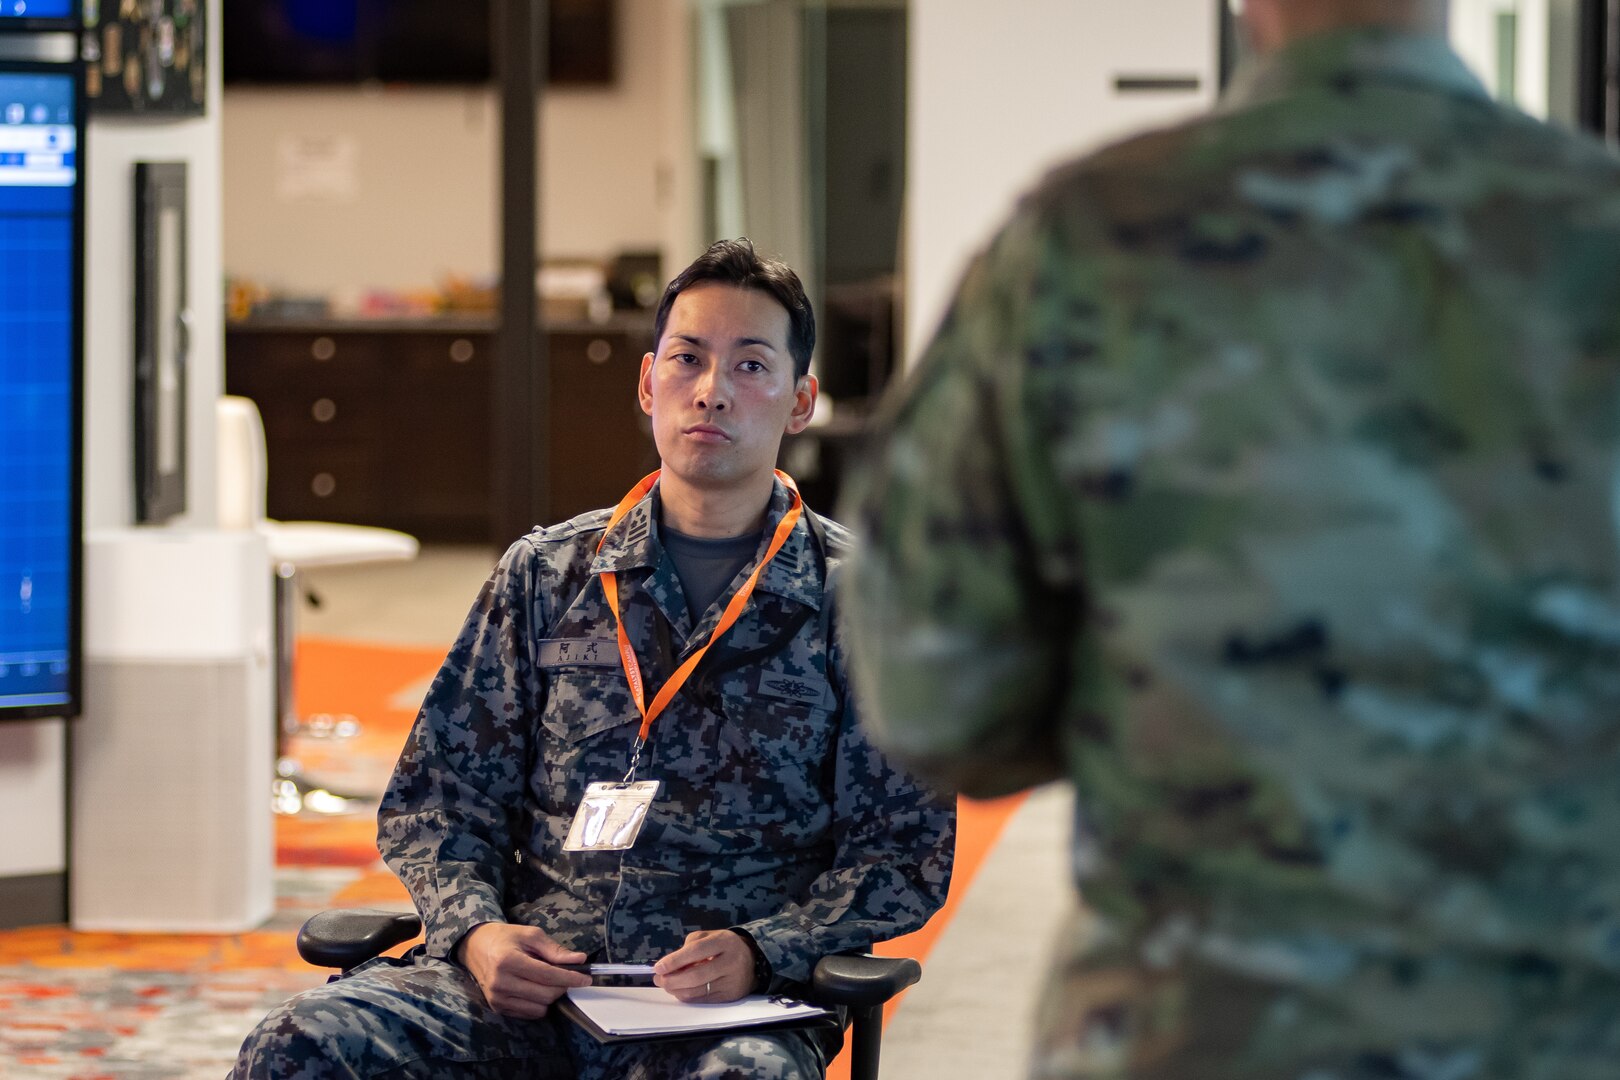 Man in Japanese uniform sits and listens to a briefing